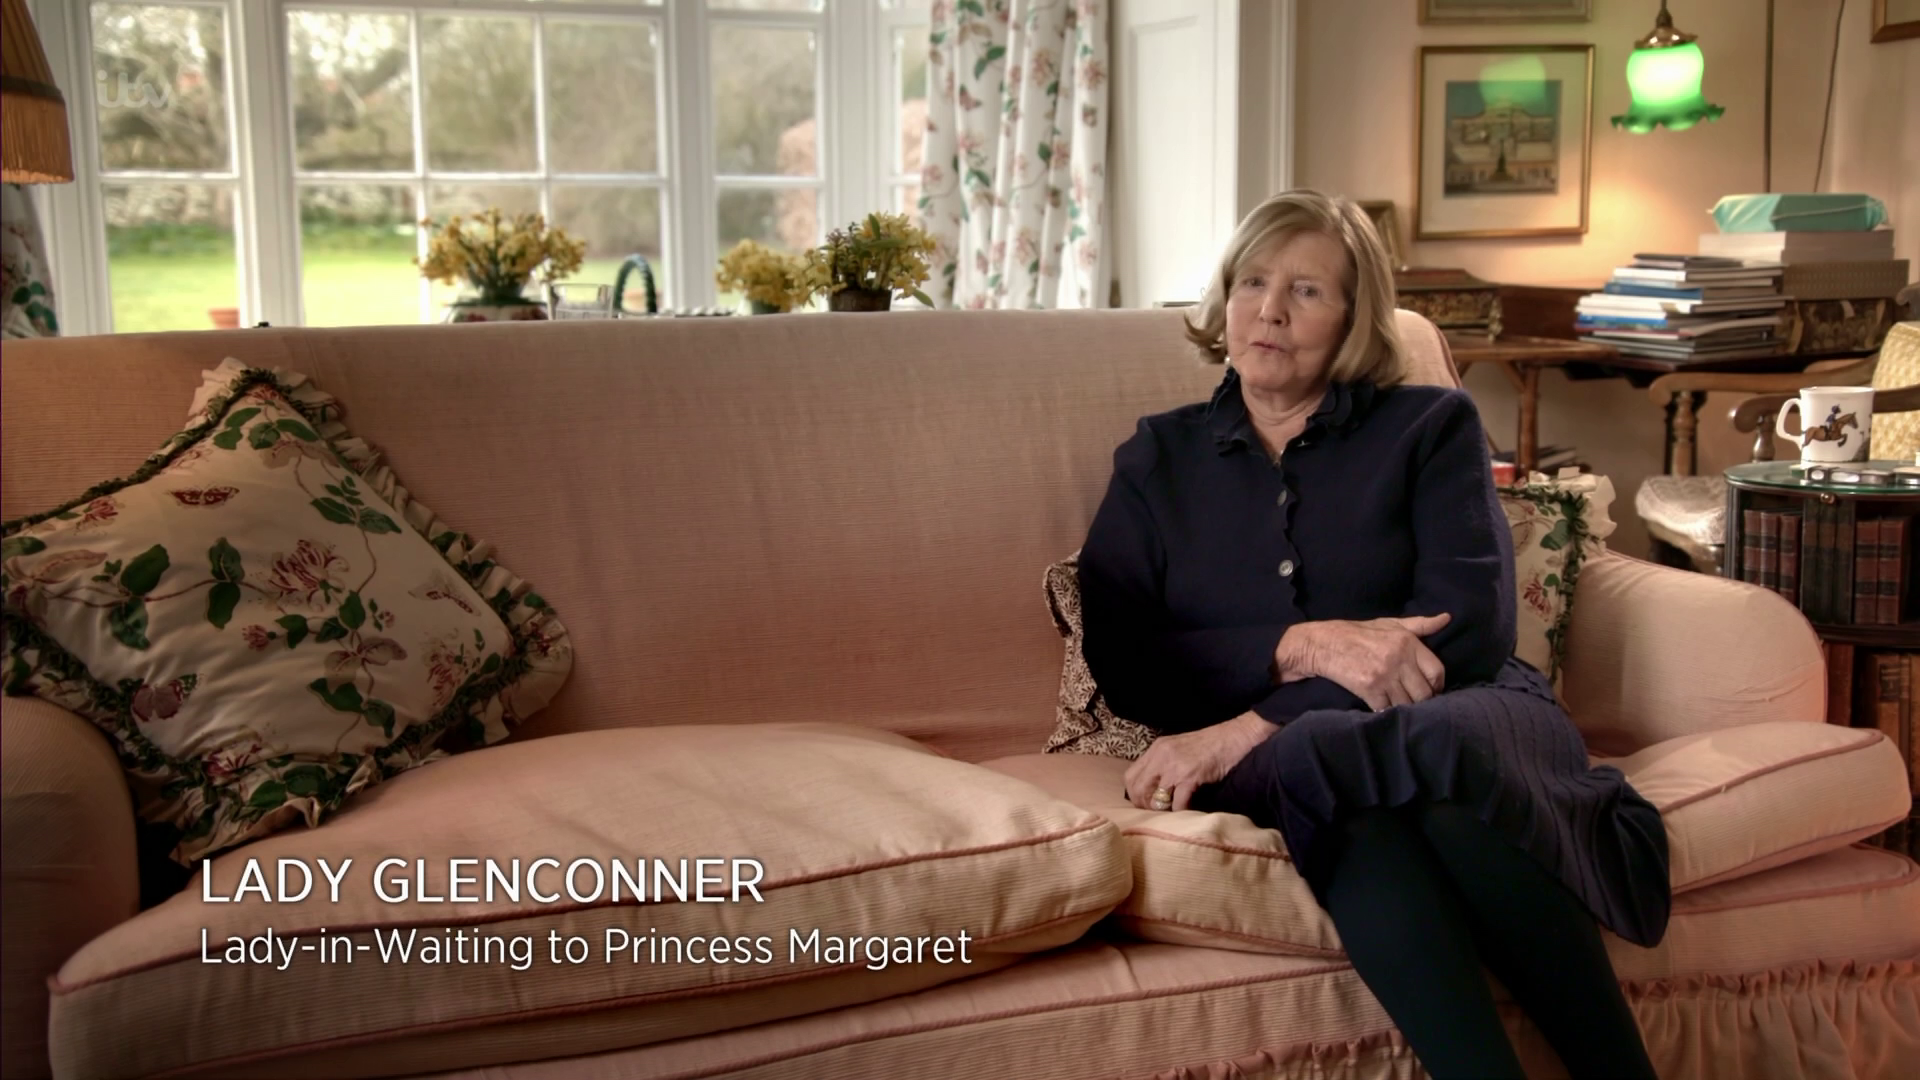  Lady Glenconner said in the documentary that Kate has done a good job in letting William shine 